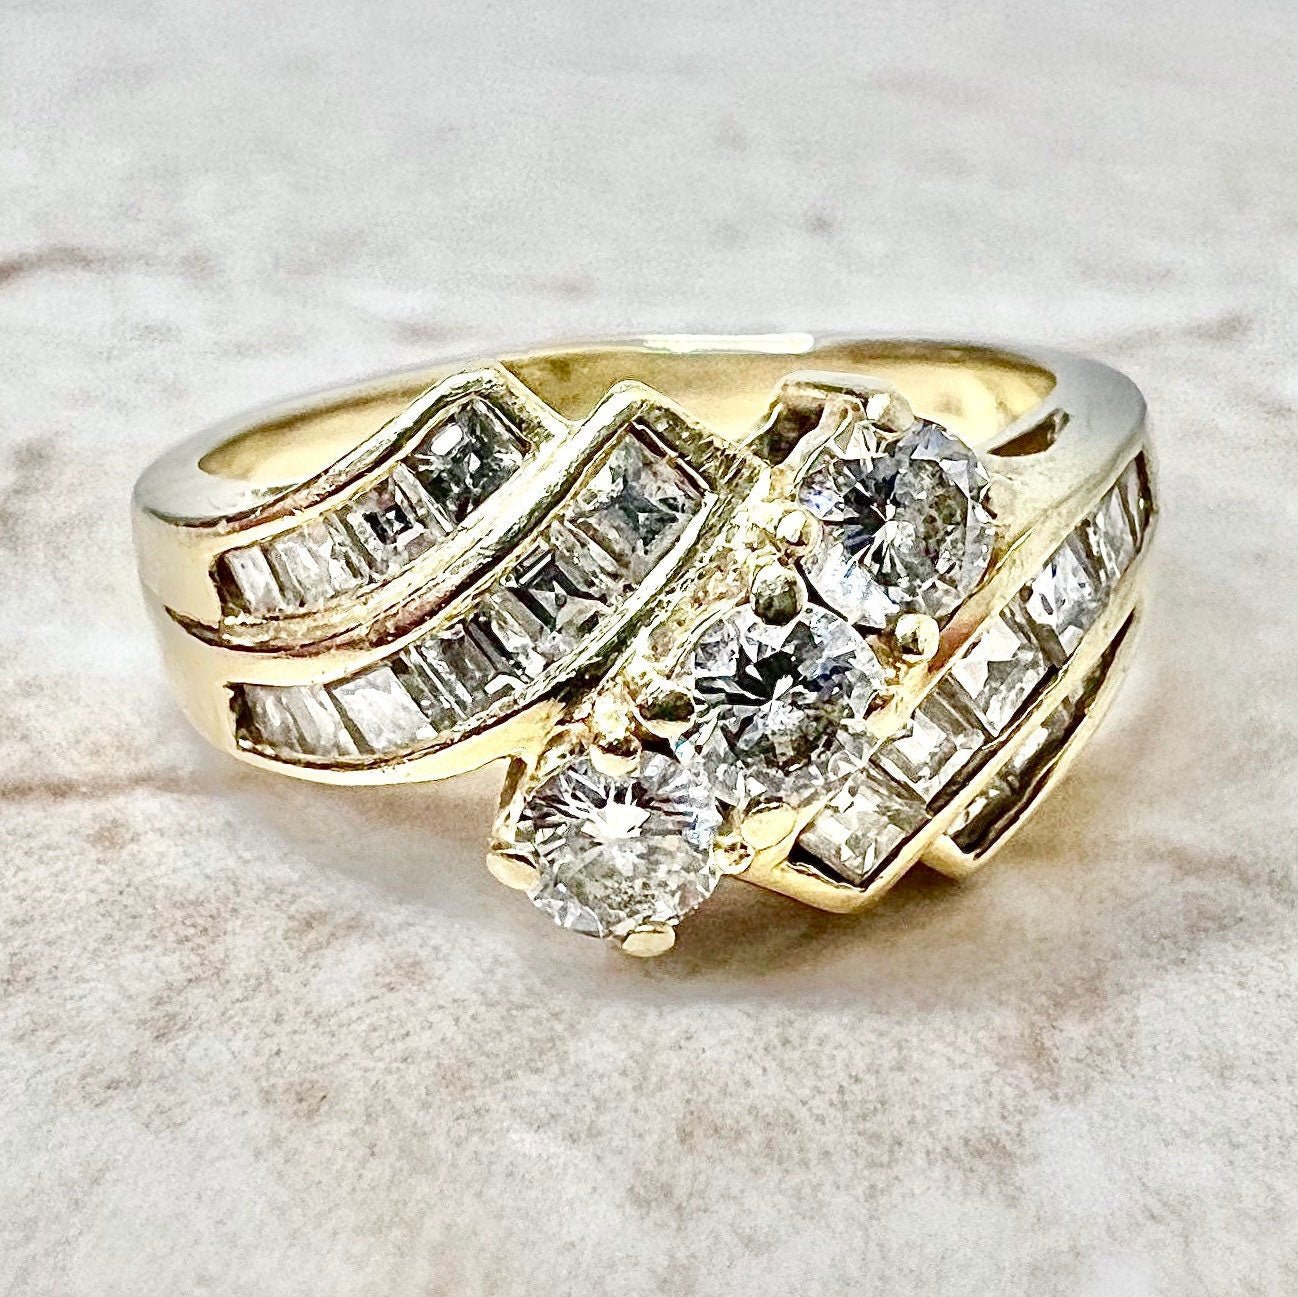 18K Three Stone Diamond Ring - Yellow Gold Diamond Cocktail Ring - Anniversary Ring - Promise Ring - Birthday Gift - Best Gift For Her